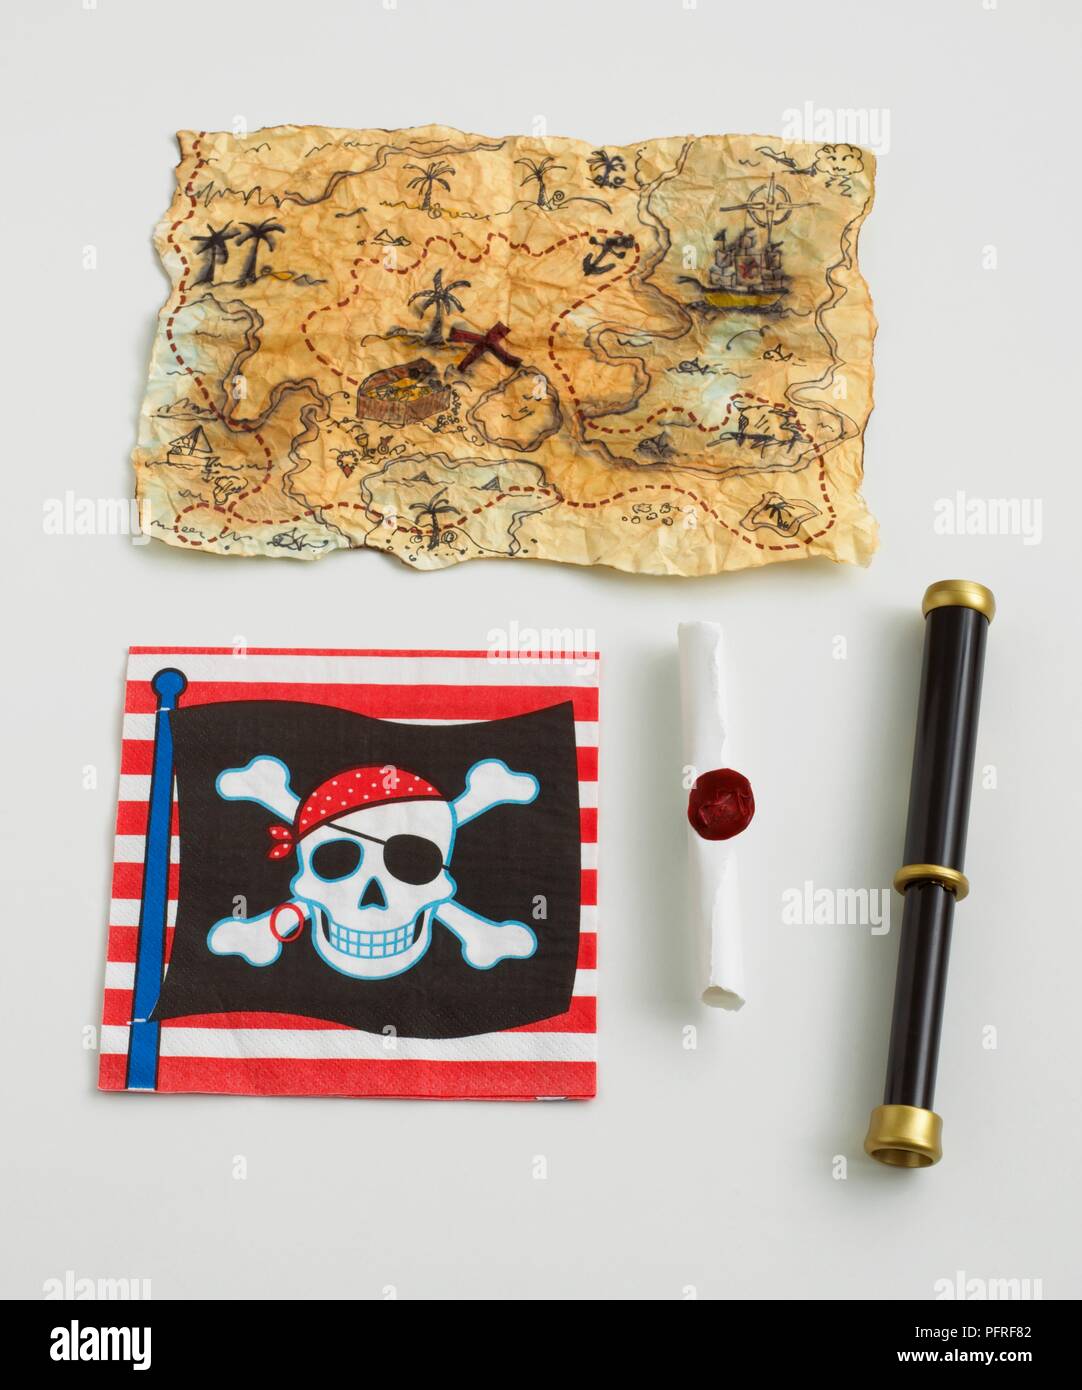 pirate-map-skull-and-crossbones-flag-scroll-woth-red-seal-and